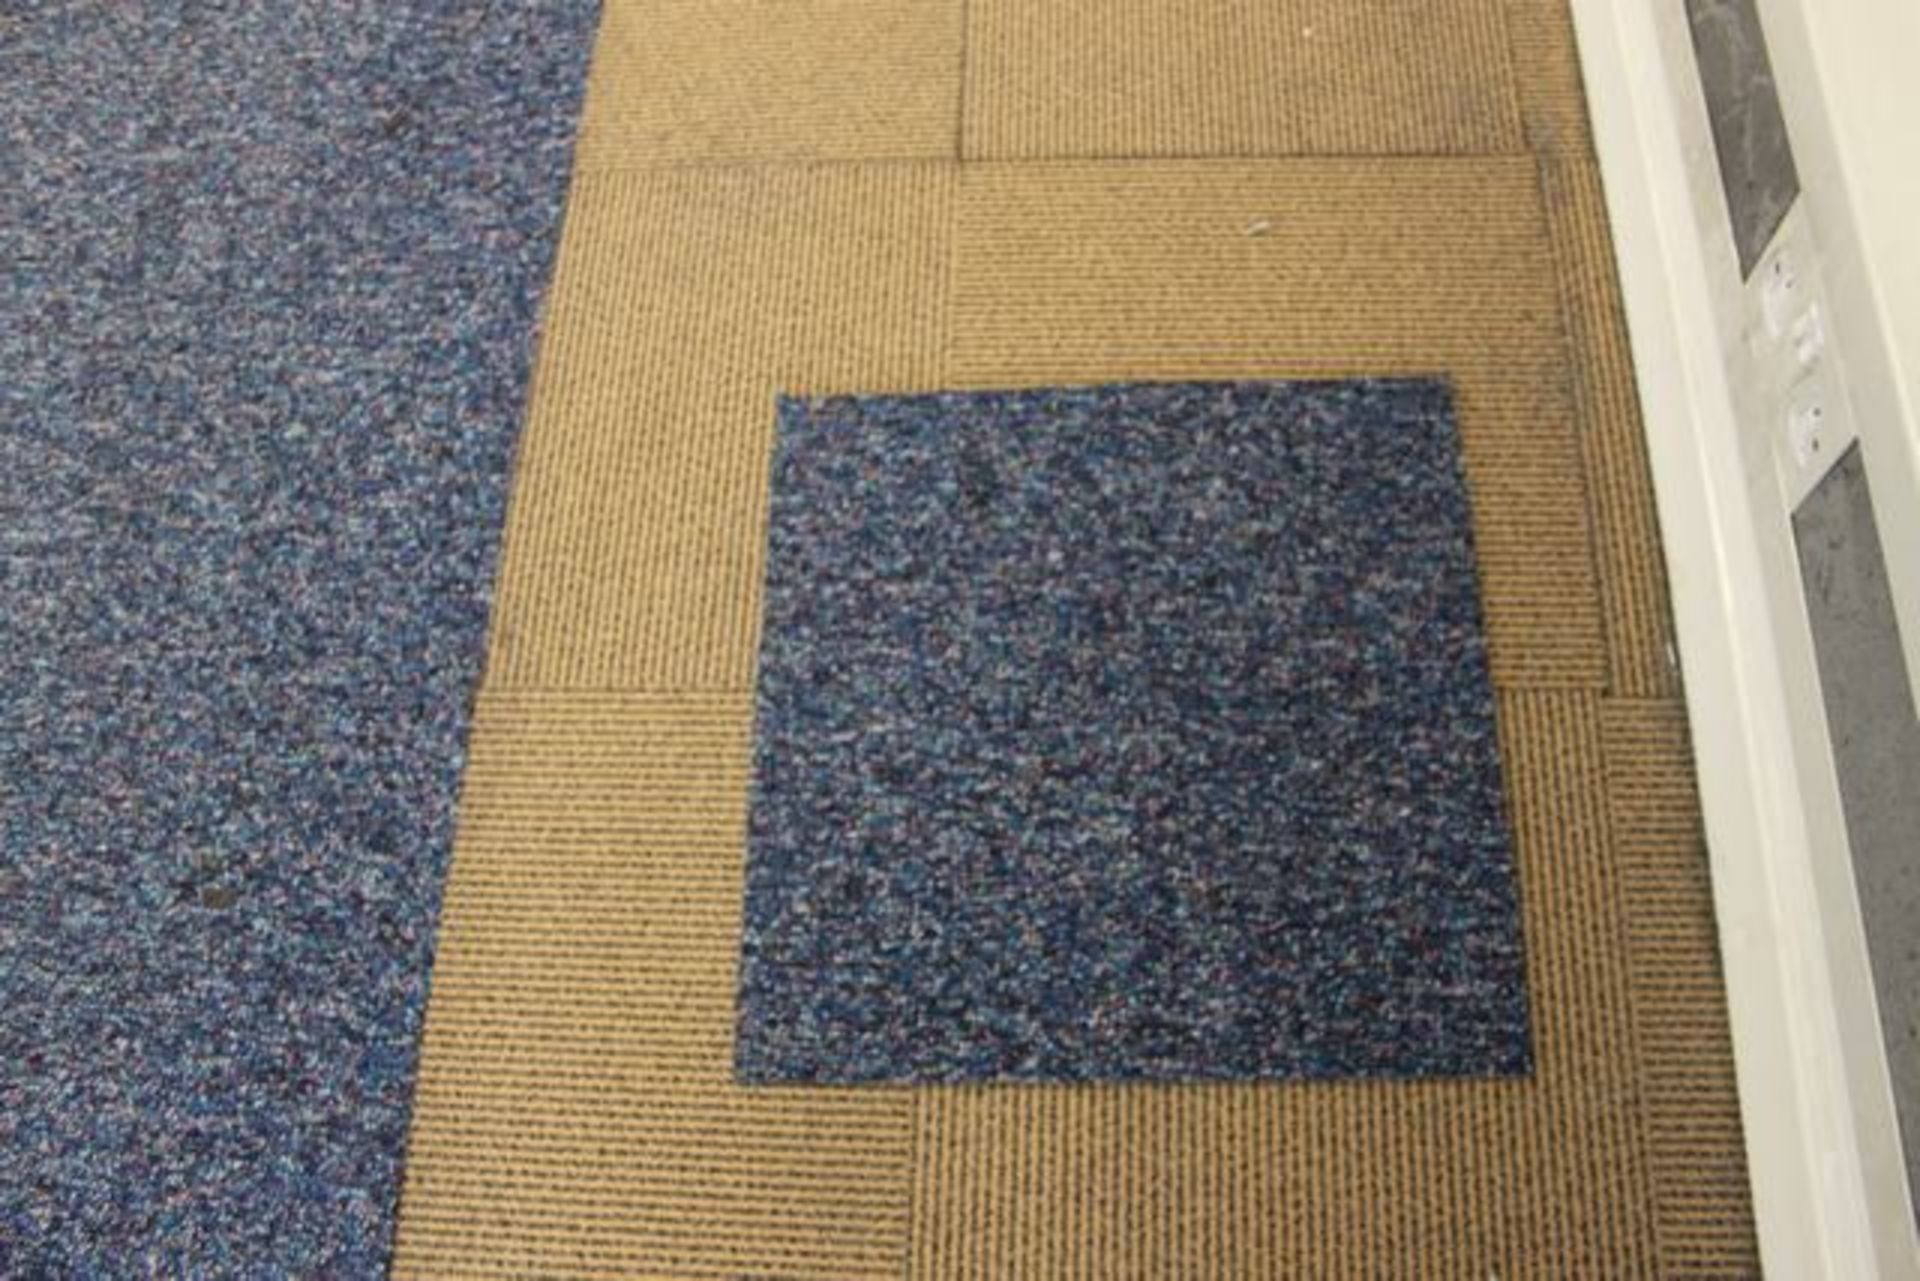 Approximately 1300 x Burmatex looped pile dyed nylon carpet tile 50cm x 50cm >>Lift out charge  150